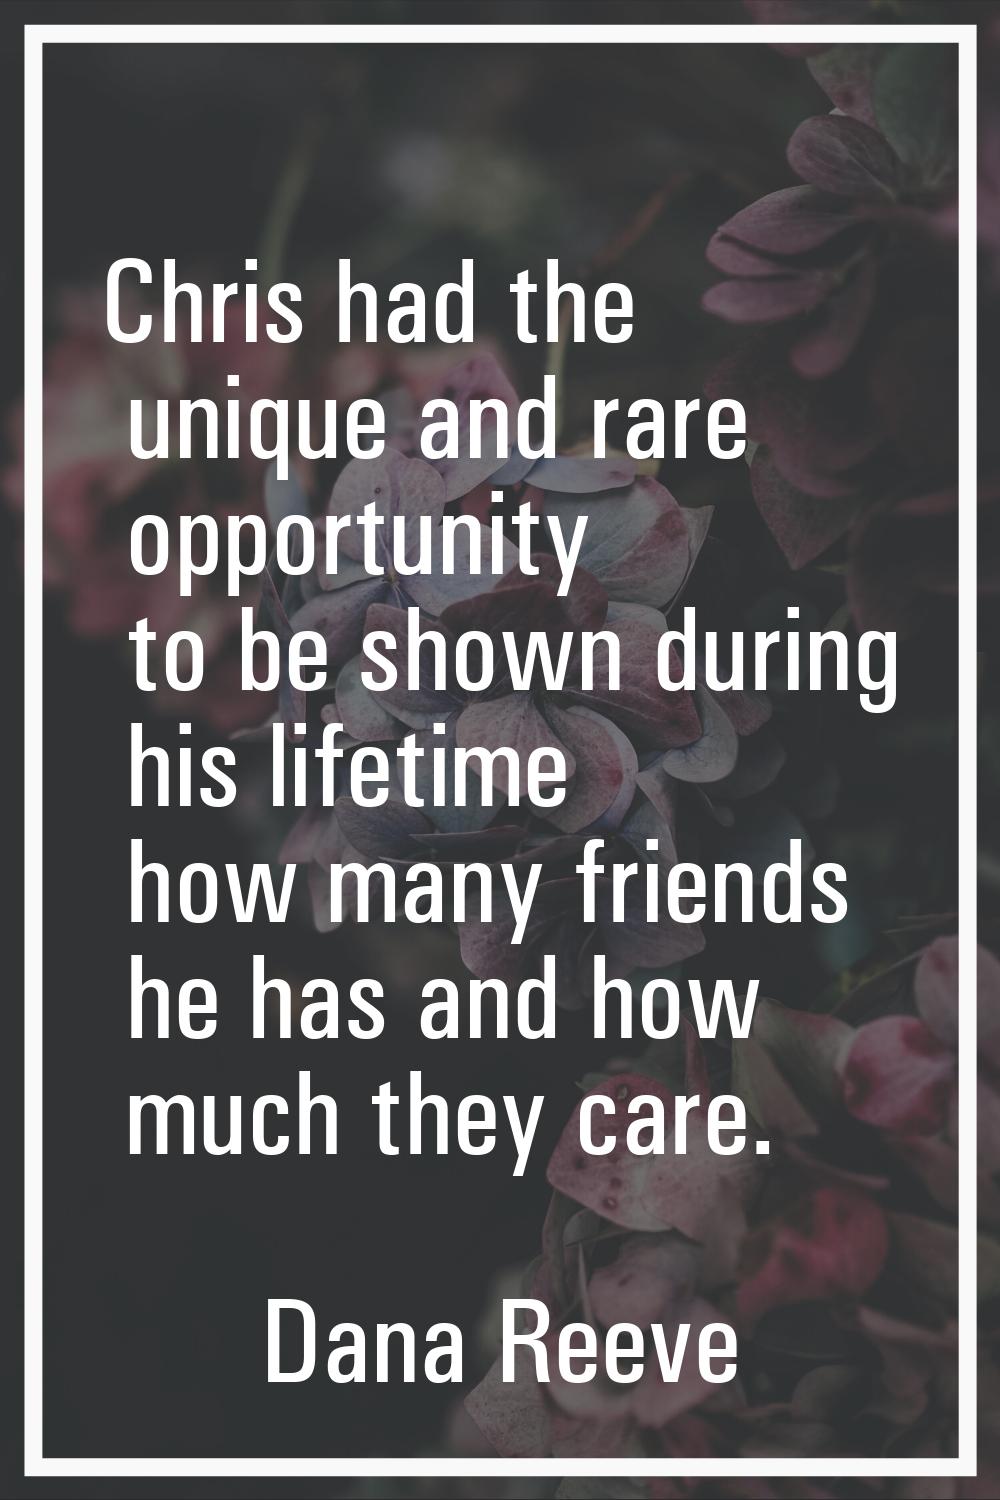 Chris had the unique and rare opportunity to be shown during his lifetime how many friends he has a